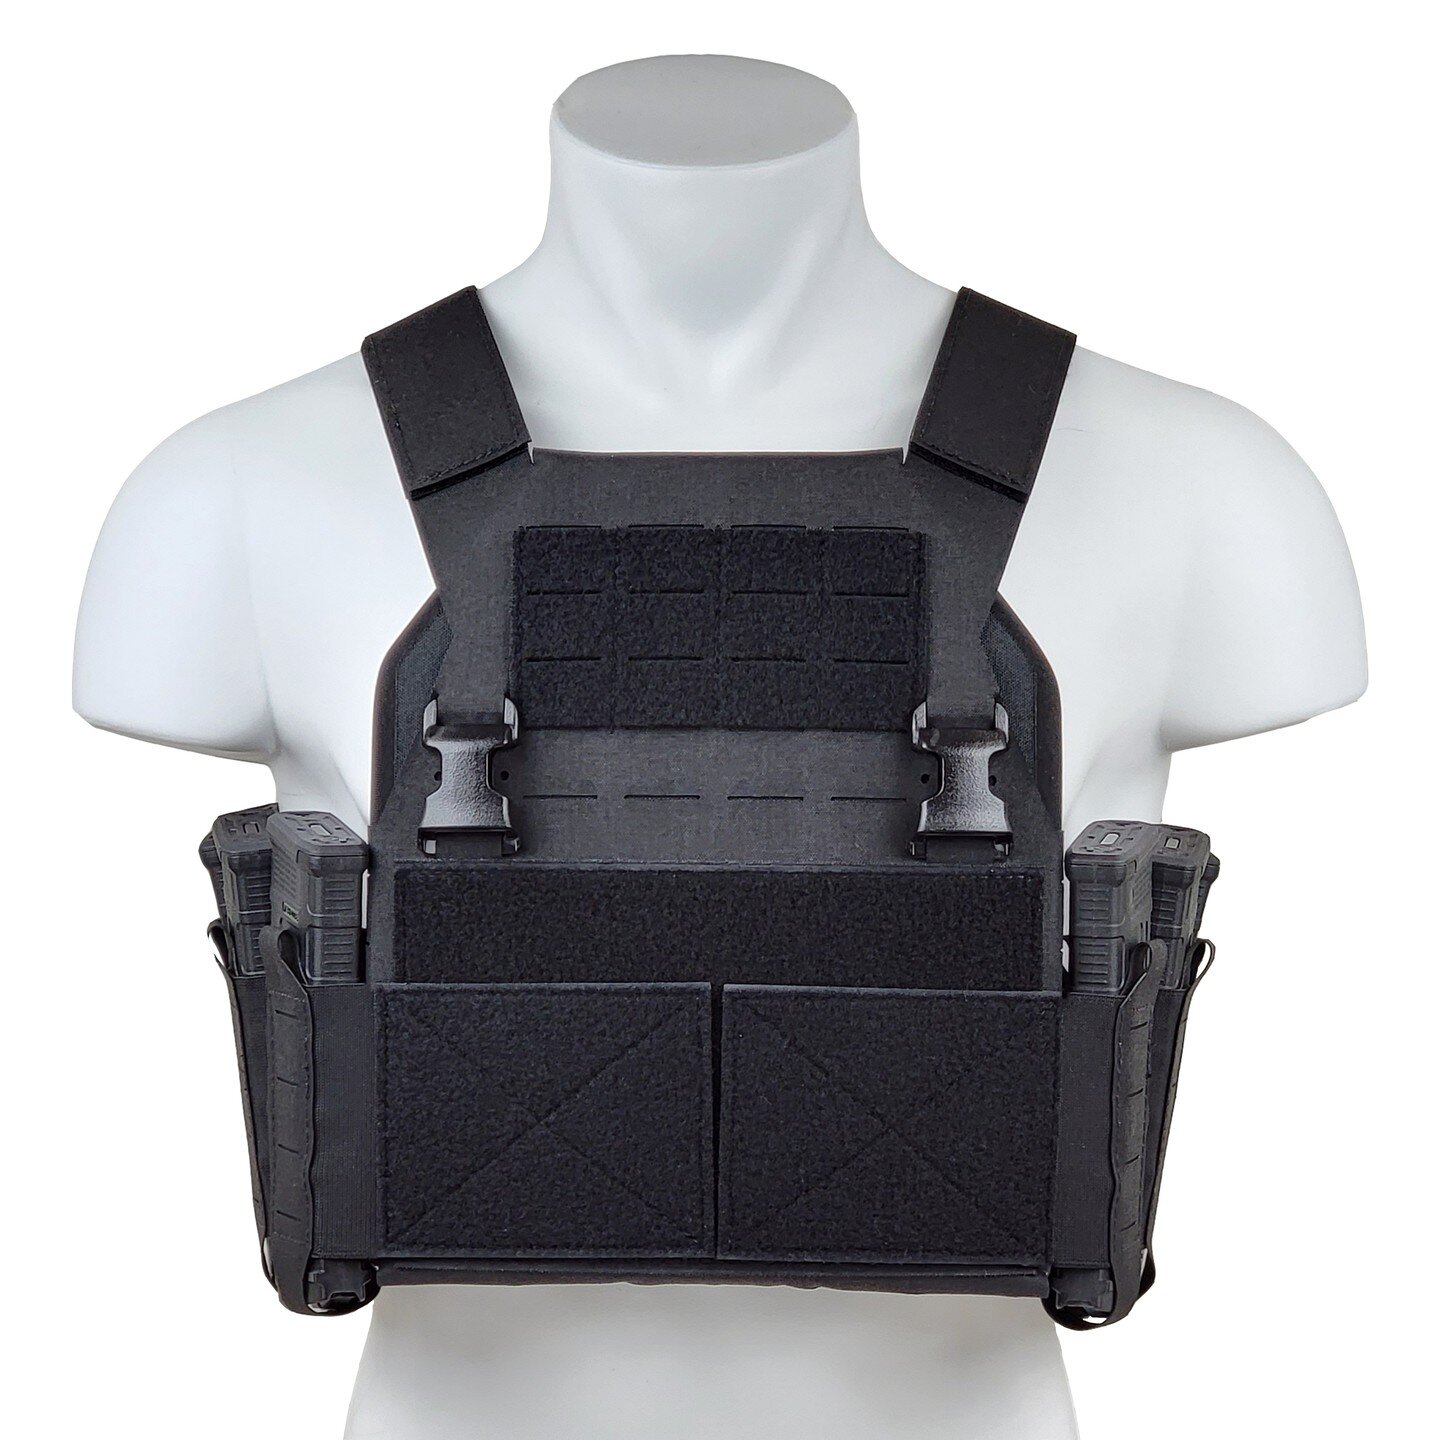 One of the cool features of our SLPC carrier is that Shooter cut plate bags will fit both Shooter and Sapi cut plates!

The Build:
-SLPC with 3.5 Section Cummerbund 10x12 Shooter (with 10x12 Sapi plates in it)

#tacticalgear #tactical #tacticool #she